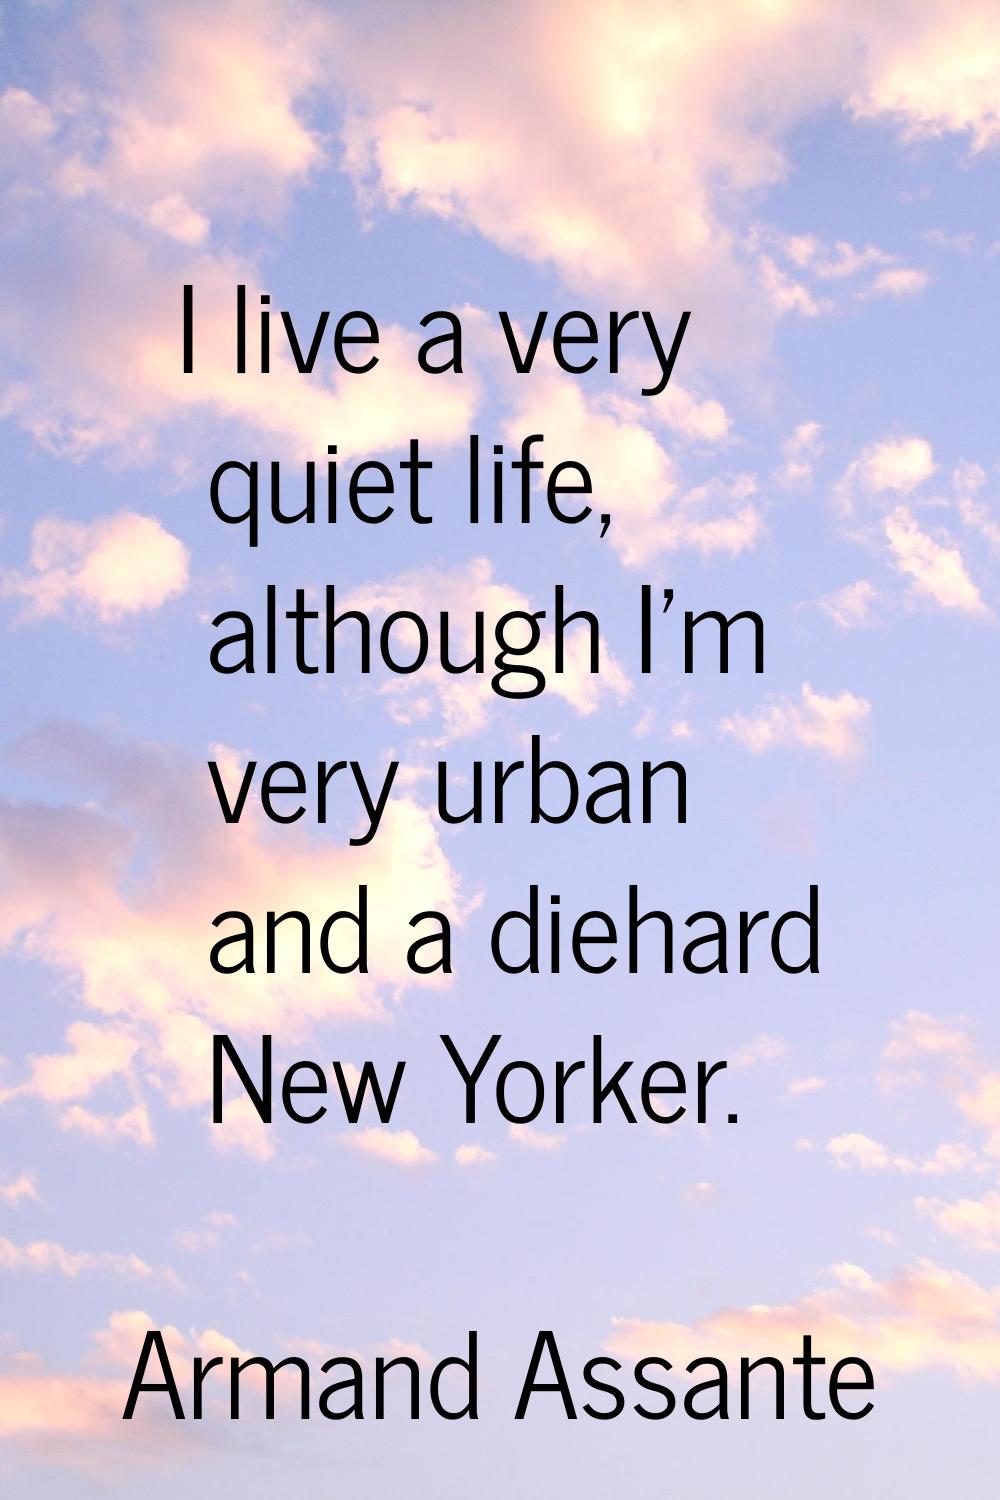 I live a very quiet life, although I'm very urban and a diehard New Yorker.